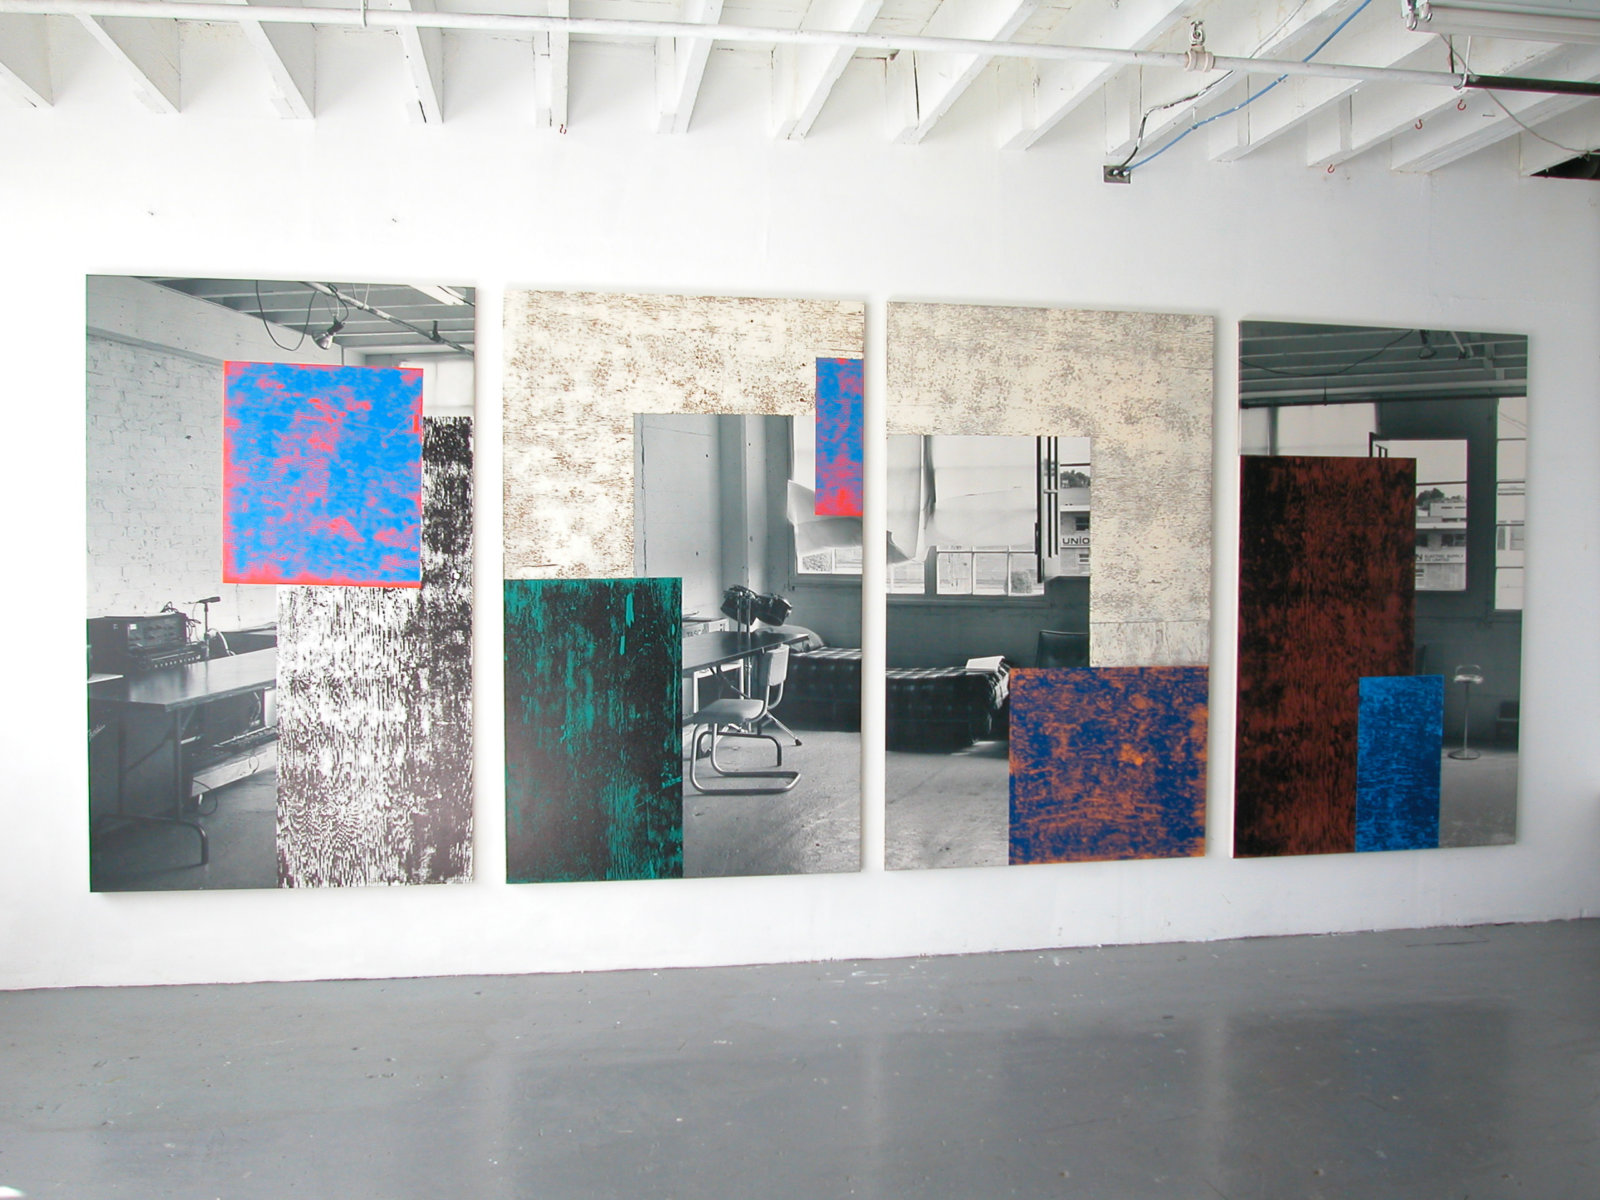 Ian Wallace, Corner of the Studio I–IV, 1993, ink monoprint with photolaminate and acrylic on canvas, each 78 x 78 in. (198 x 198 cm)